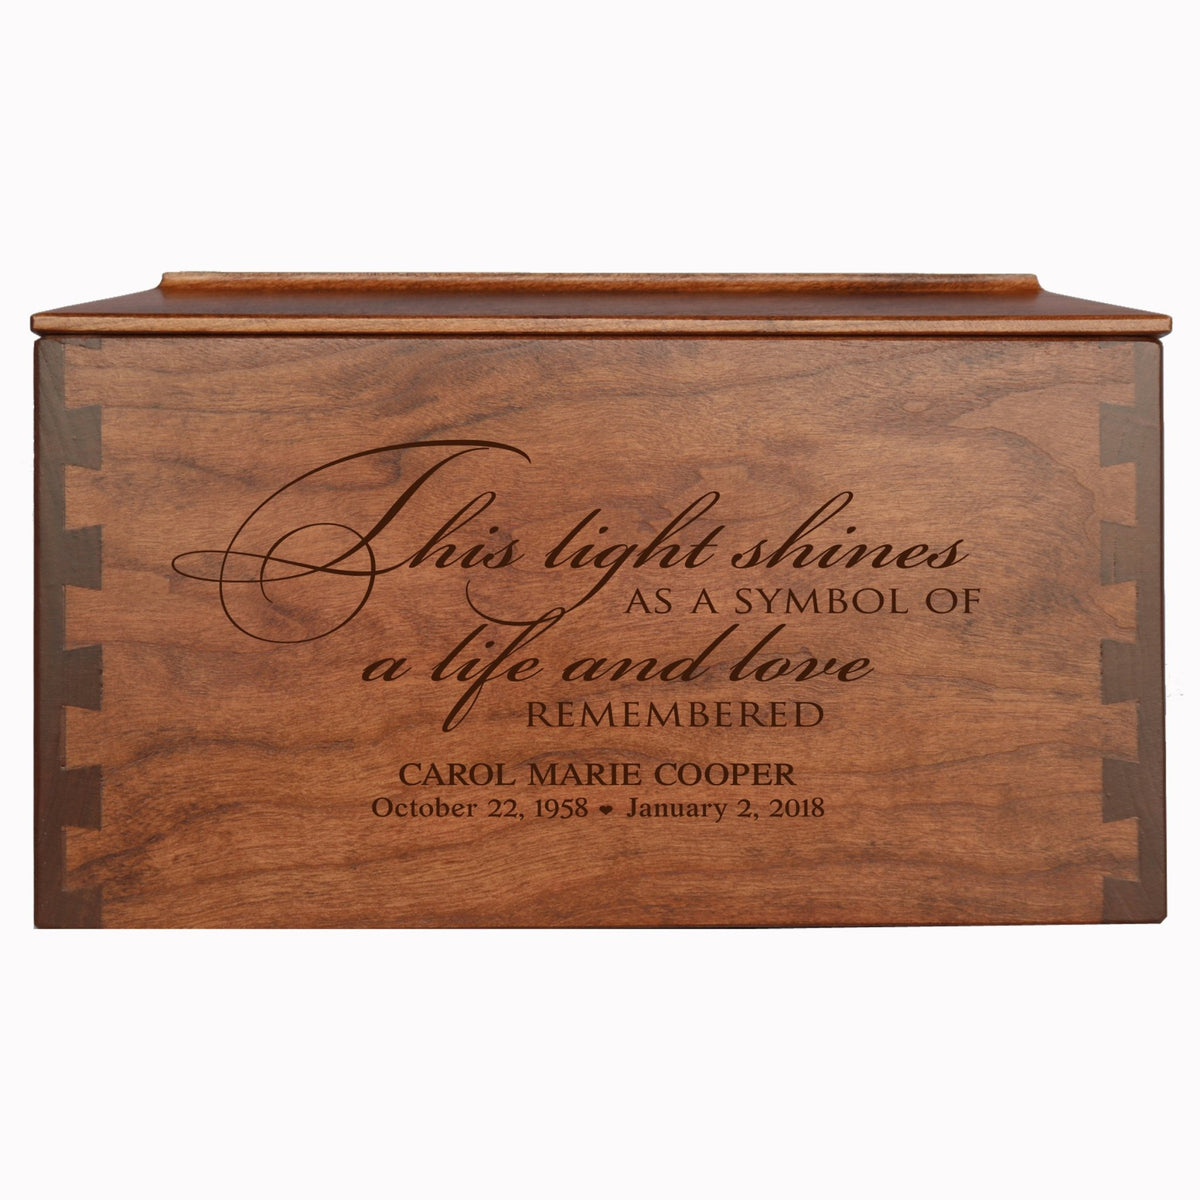 Custom Wooden Cremation Urn Box Large for Human Ashes holds 291 cu in This Light Shines - LifeSong Milestones